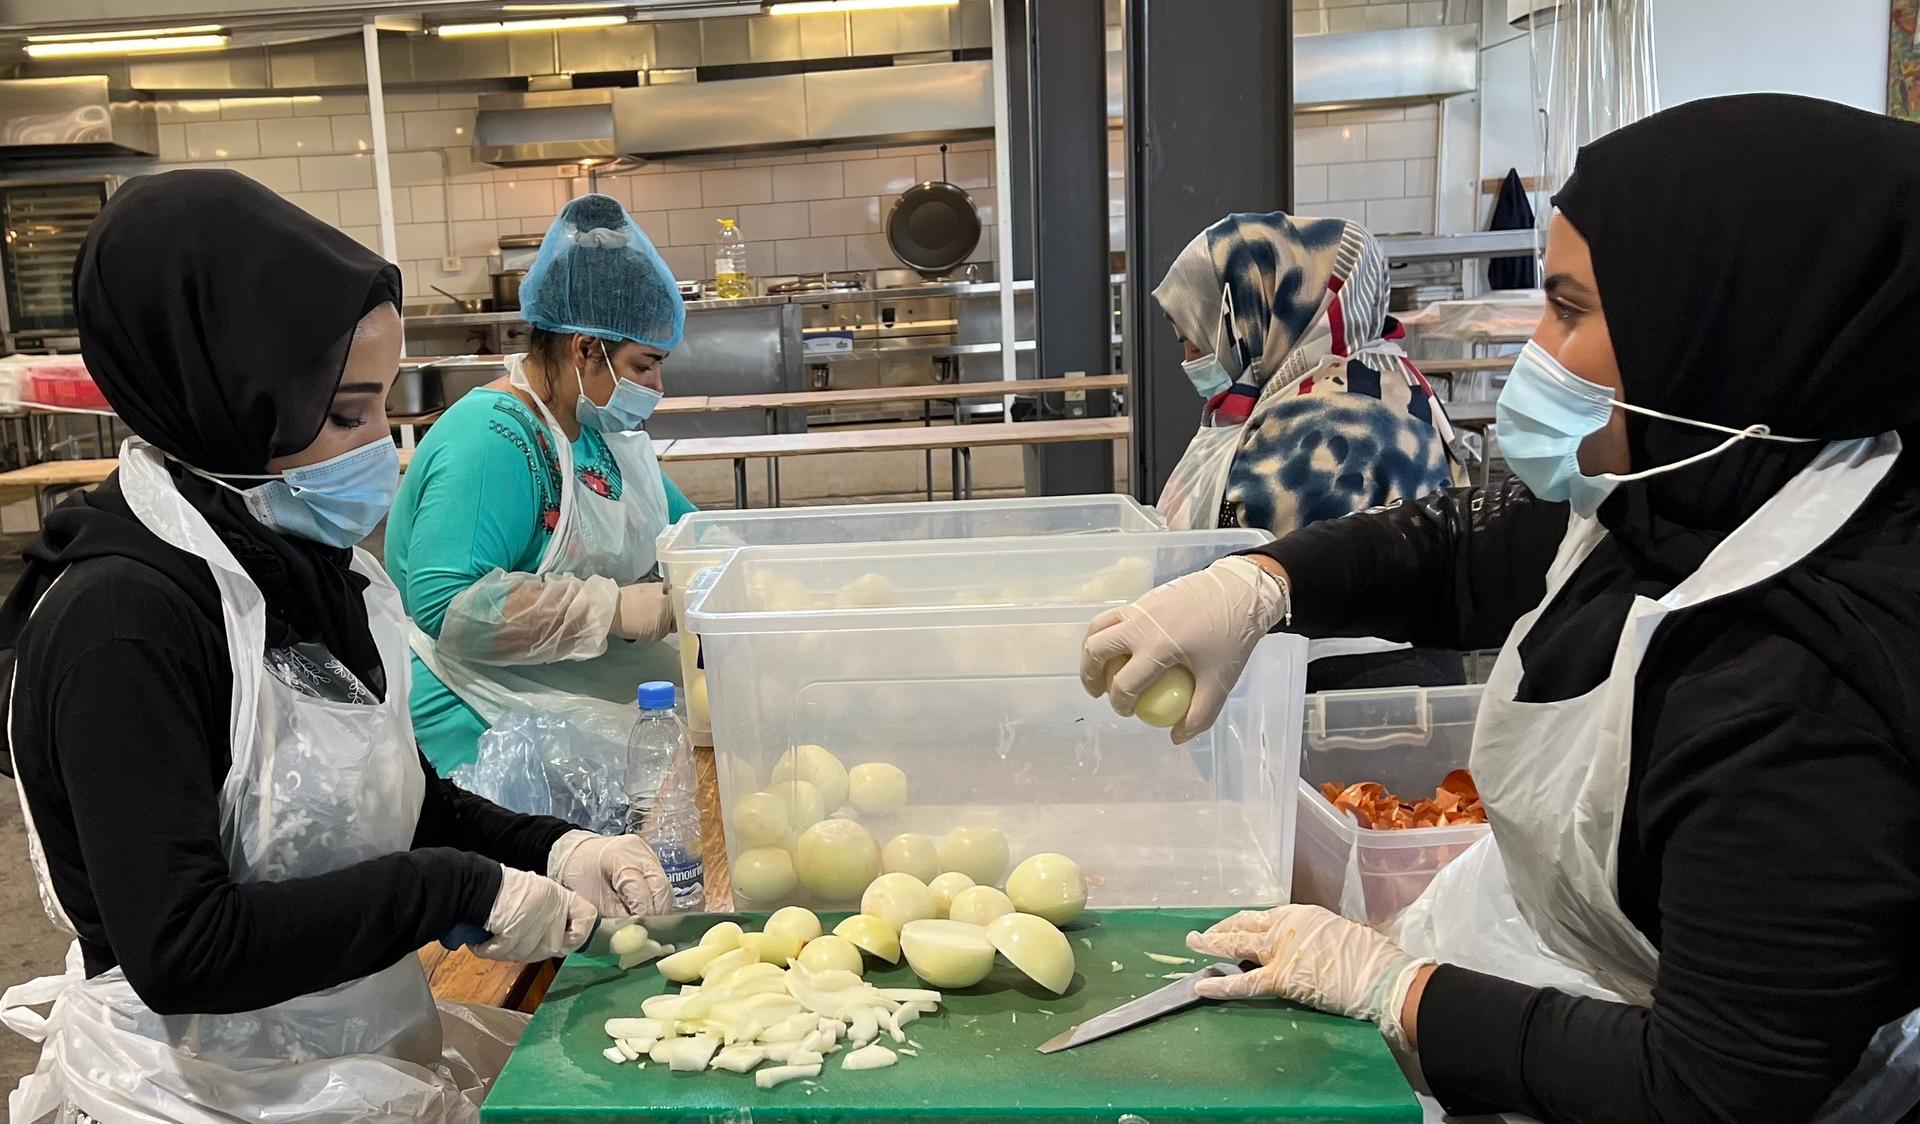 Workers prepare meals at the Matbakh El Kell Community Kitchen in Beirut. The kitchen was set up in response to the Aug. 4 Beirut port explosion, and it now serves 2,500 free meals a day to those in need.